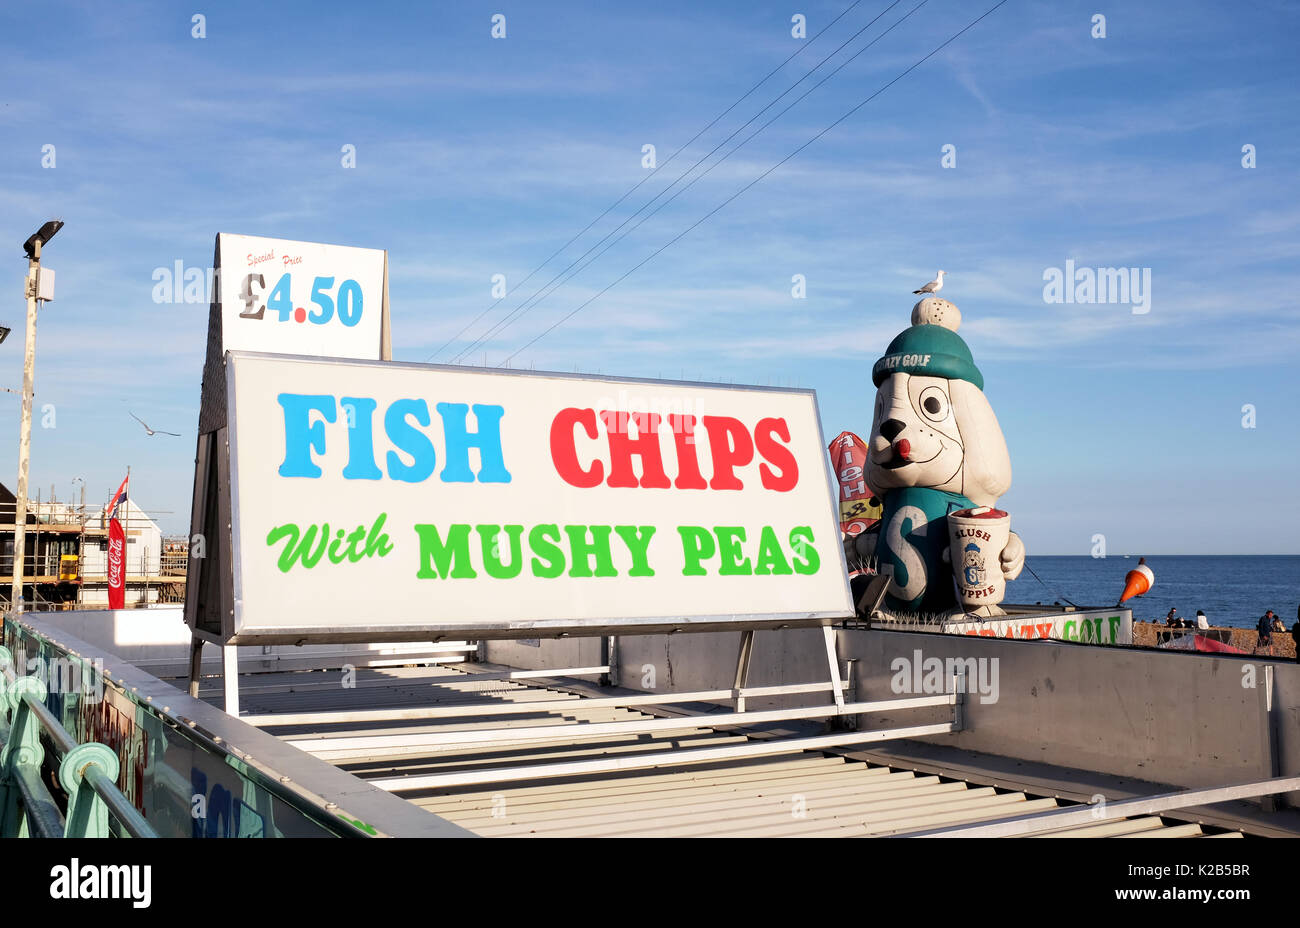 Brighton seafront summer views in August 2017 - Famous Fish & Chips Mushy Peas sign with giant Slush Puppie Stock Photo